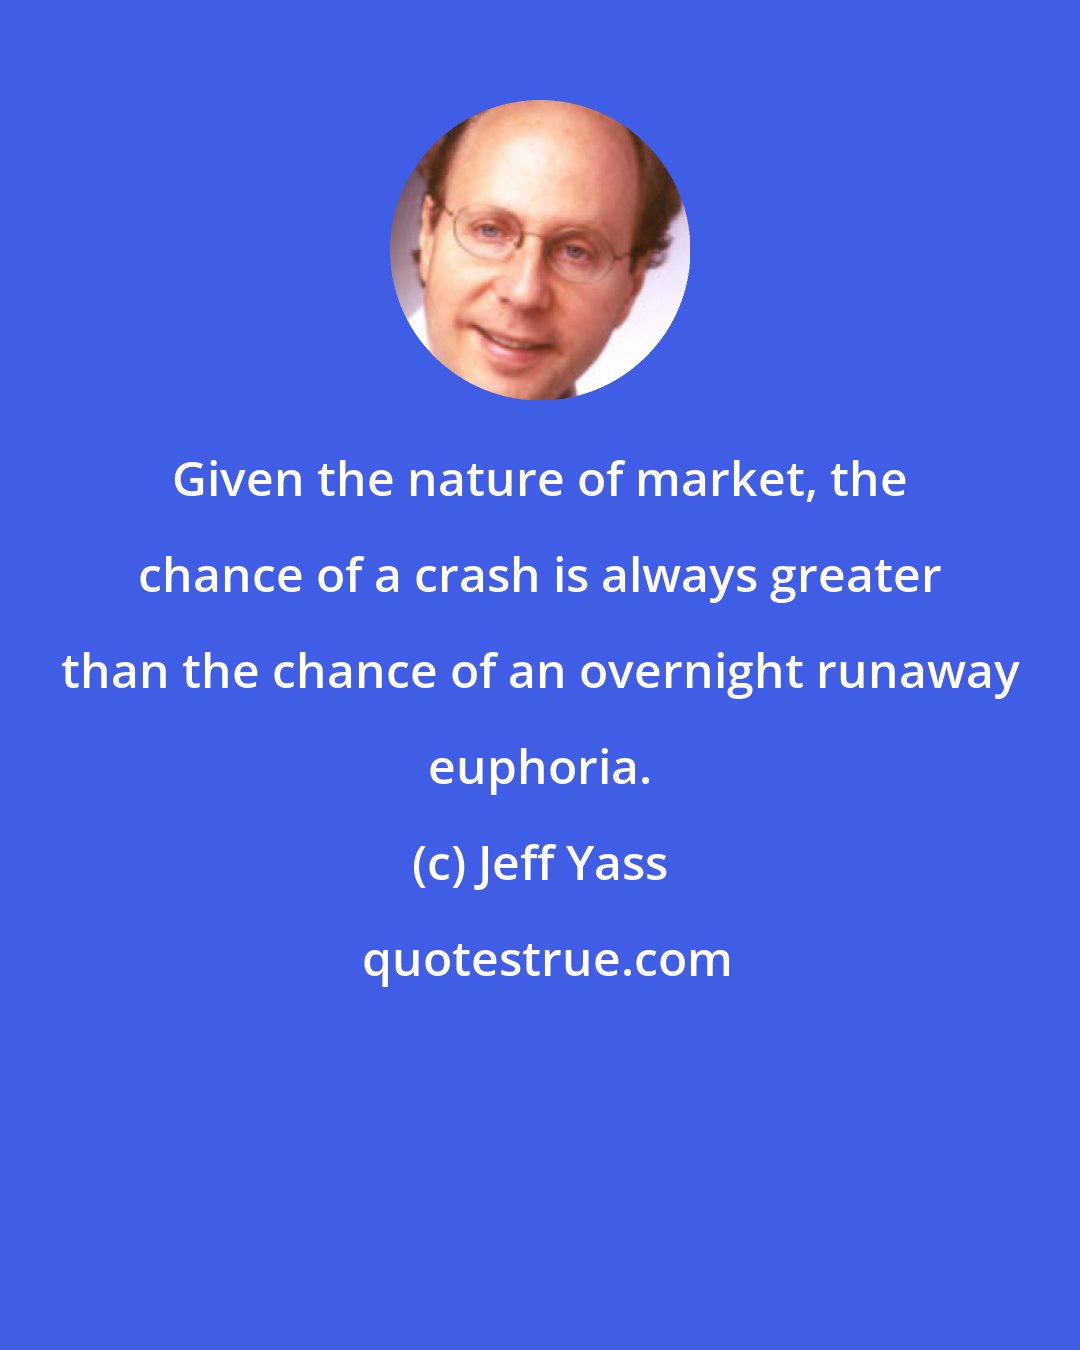 Jeff Yass: Given the nature of market, the chance of a crash is always greater than the chance of an overnight runaway euphoria.